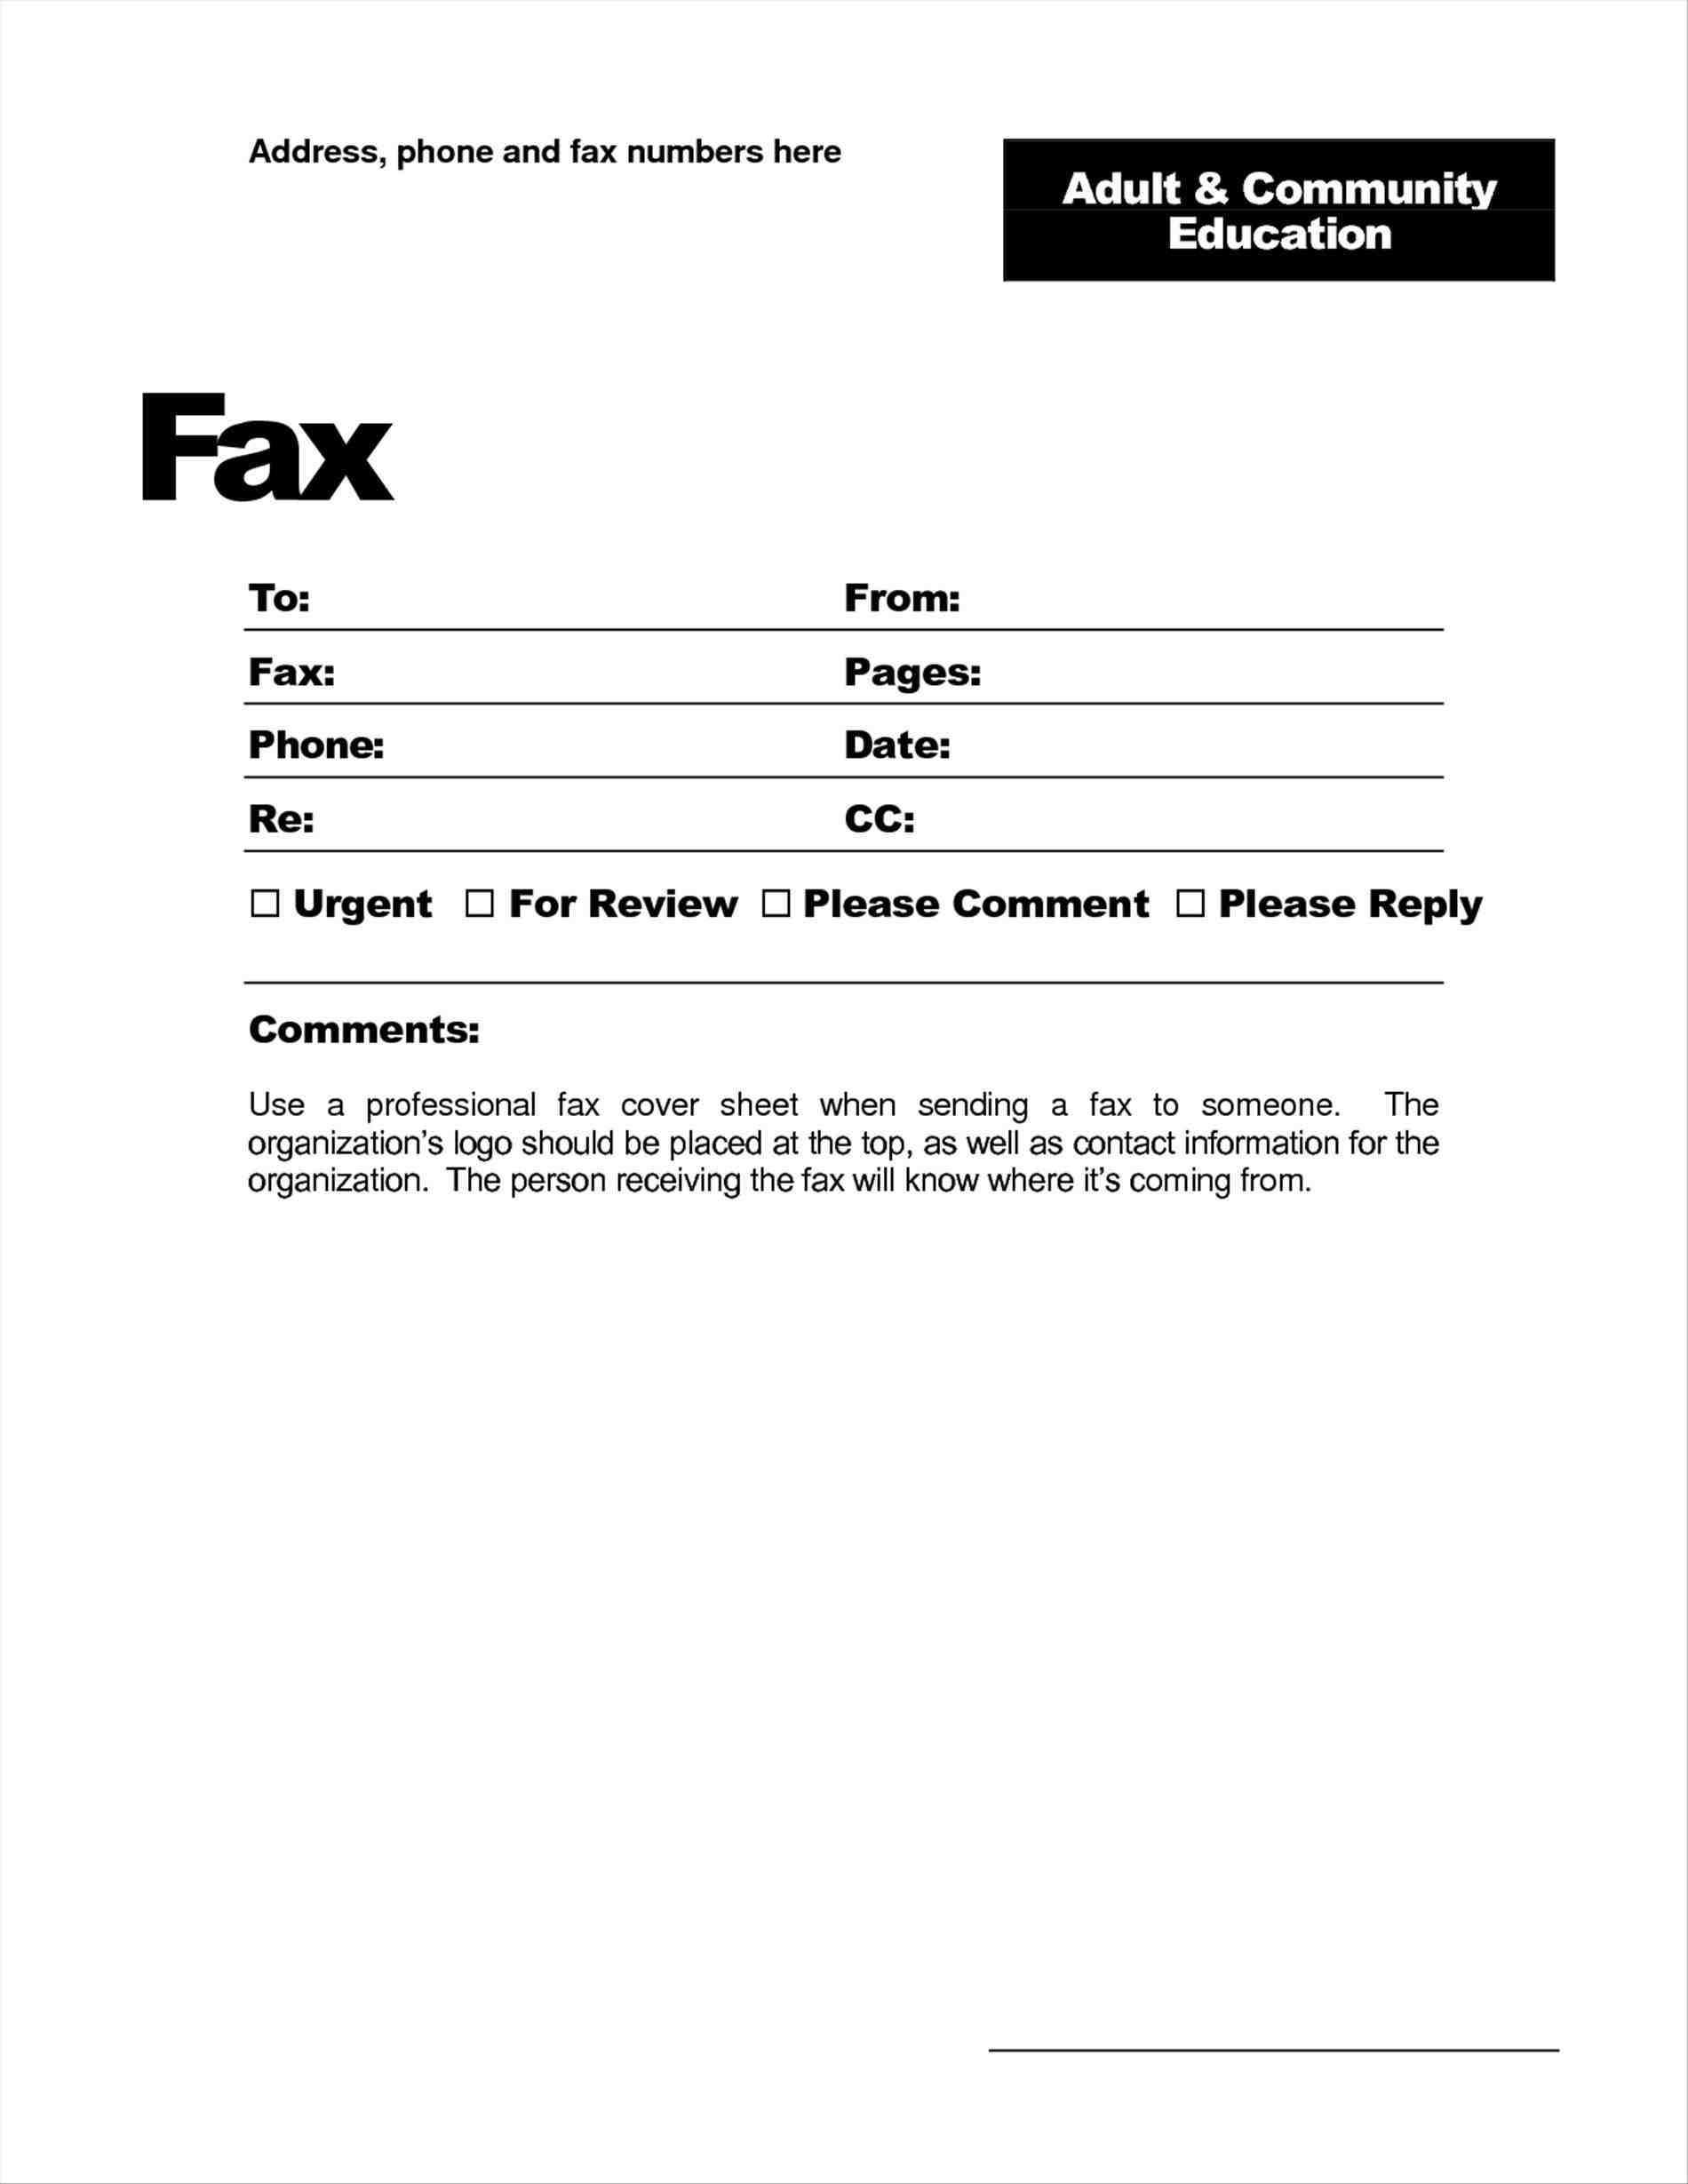 028 Basic Fax Cover Sheet Template Free Printable Example With Fax Cover Sheet Template Word 2010